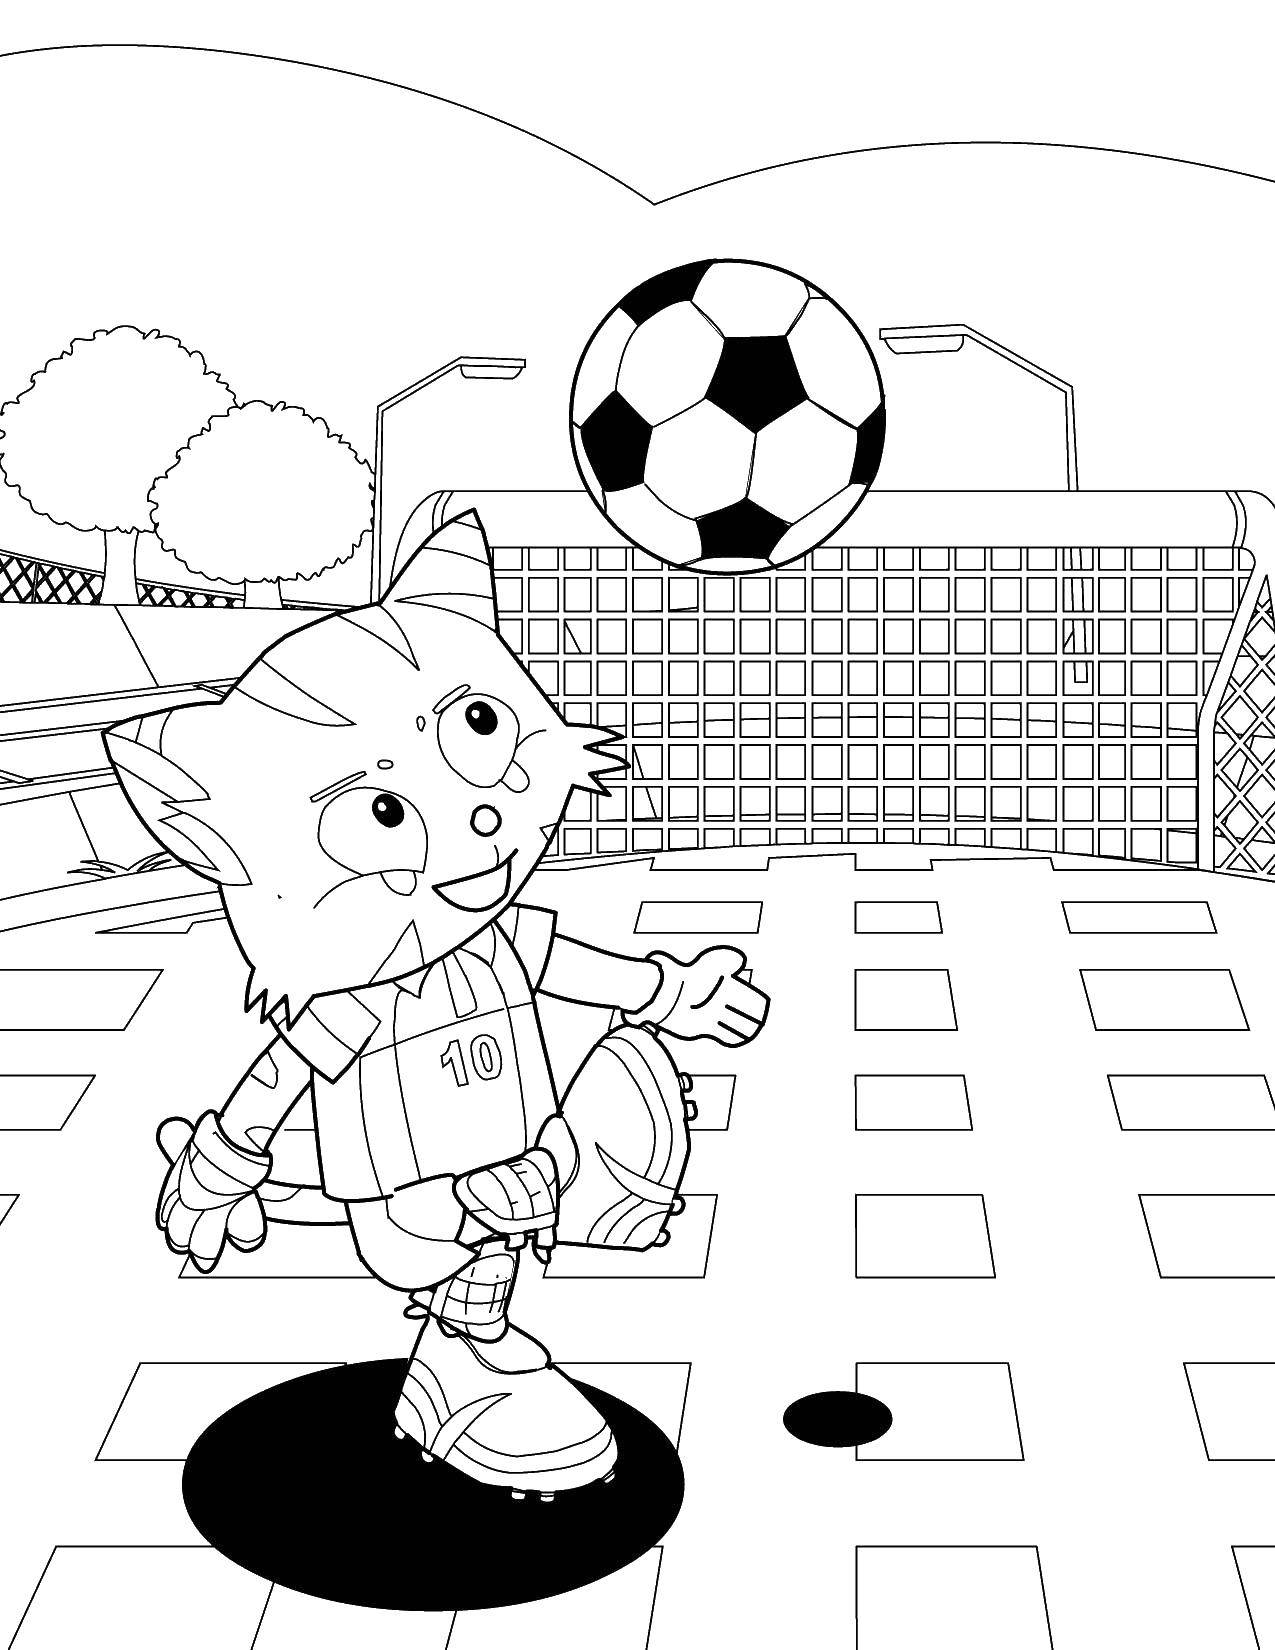 Coloring Kitten plays football. Category Football. Tags:  football, sports, cat.